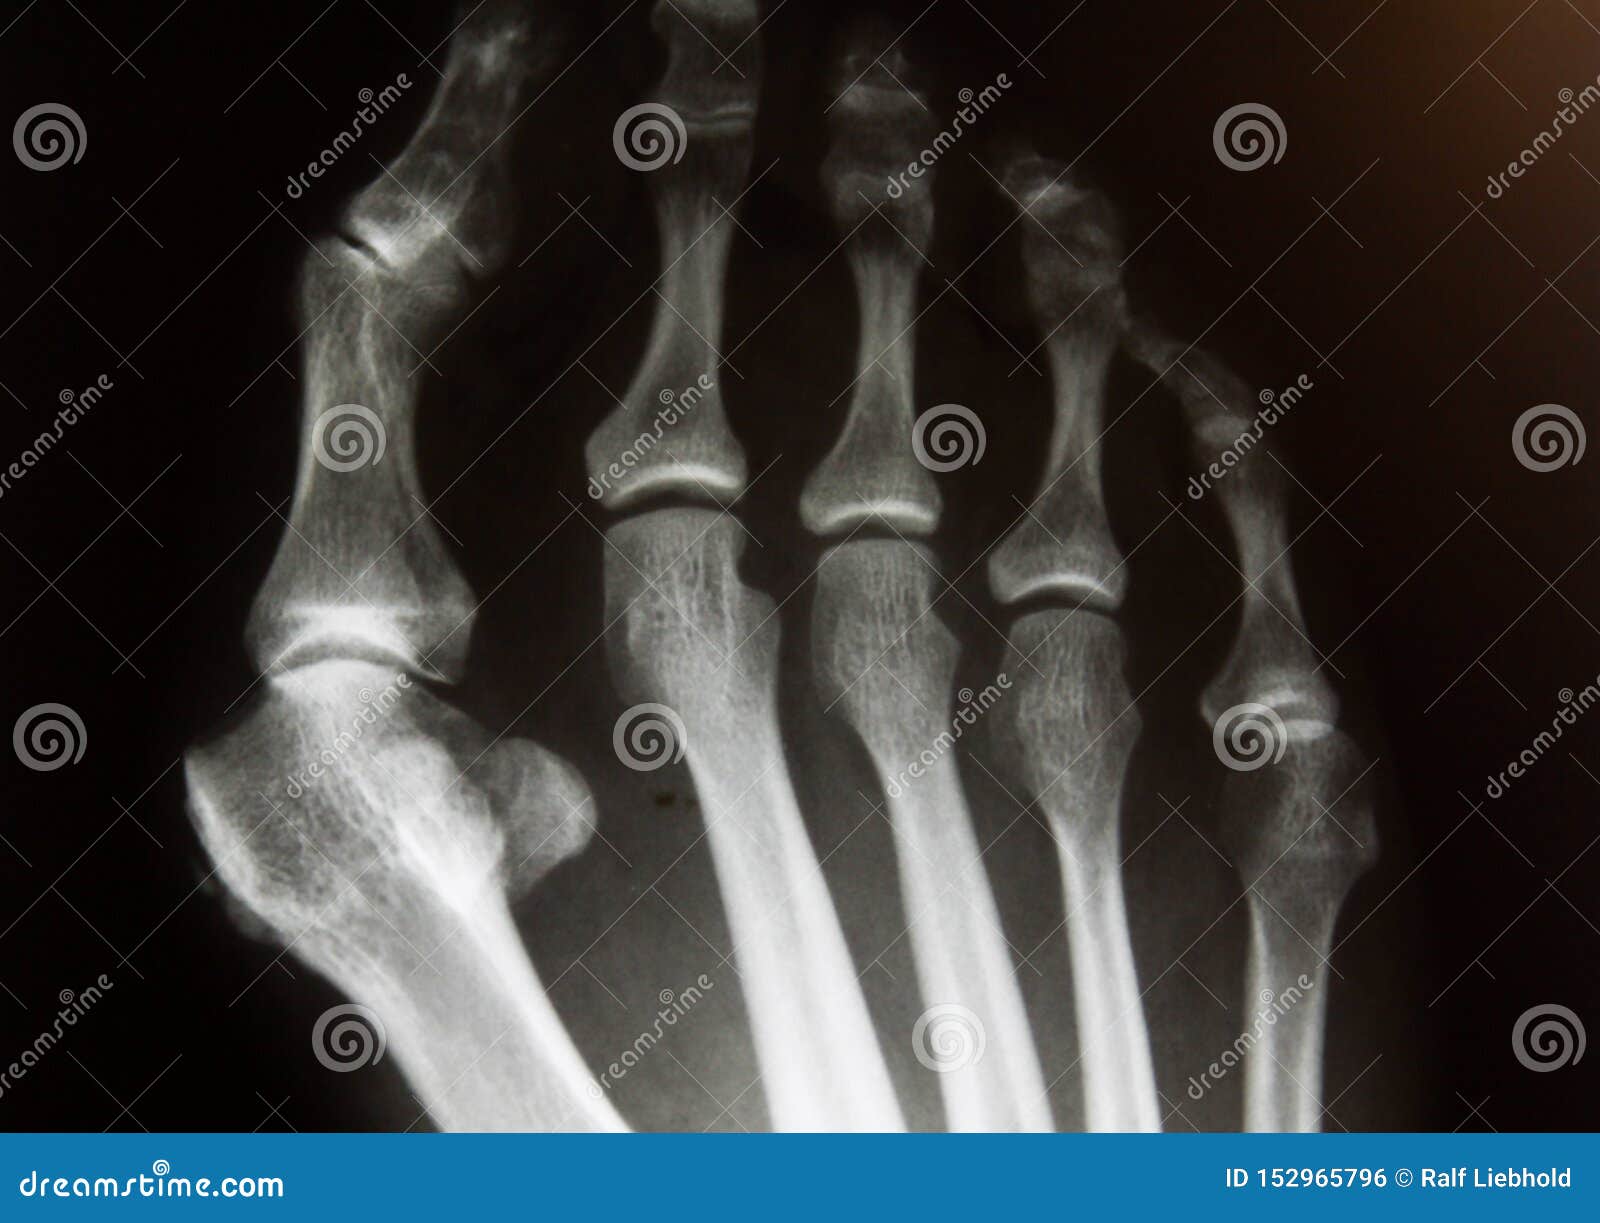 x-ray image of forefoot with hallux valgus deformity